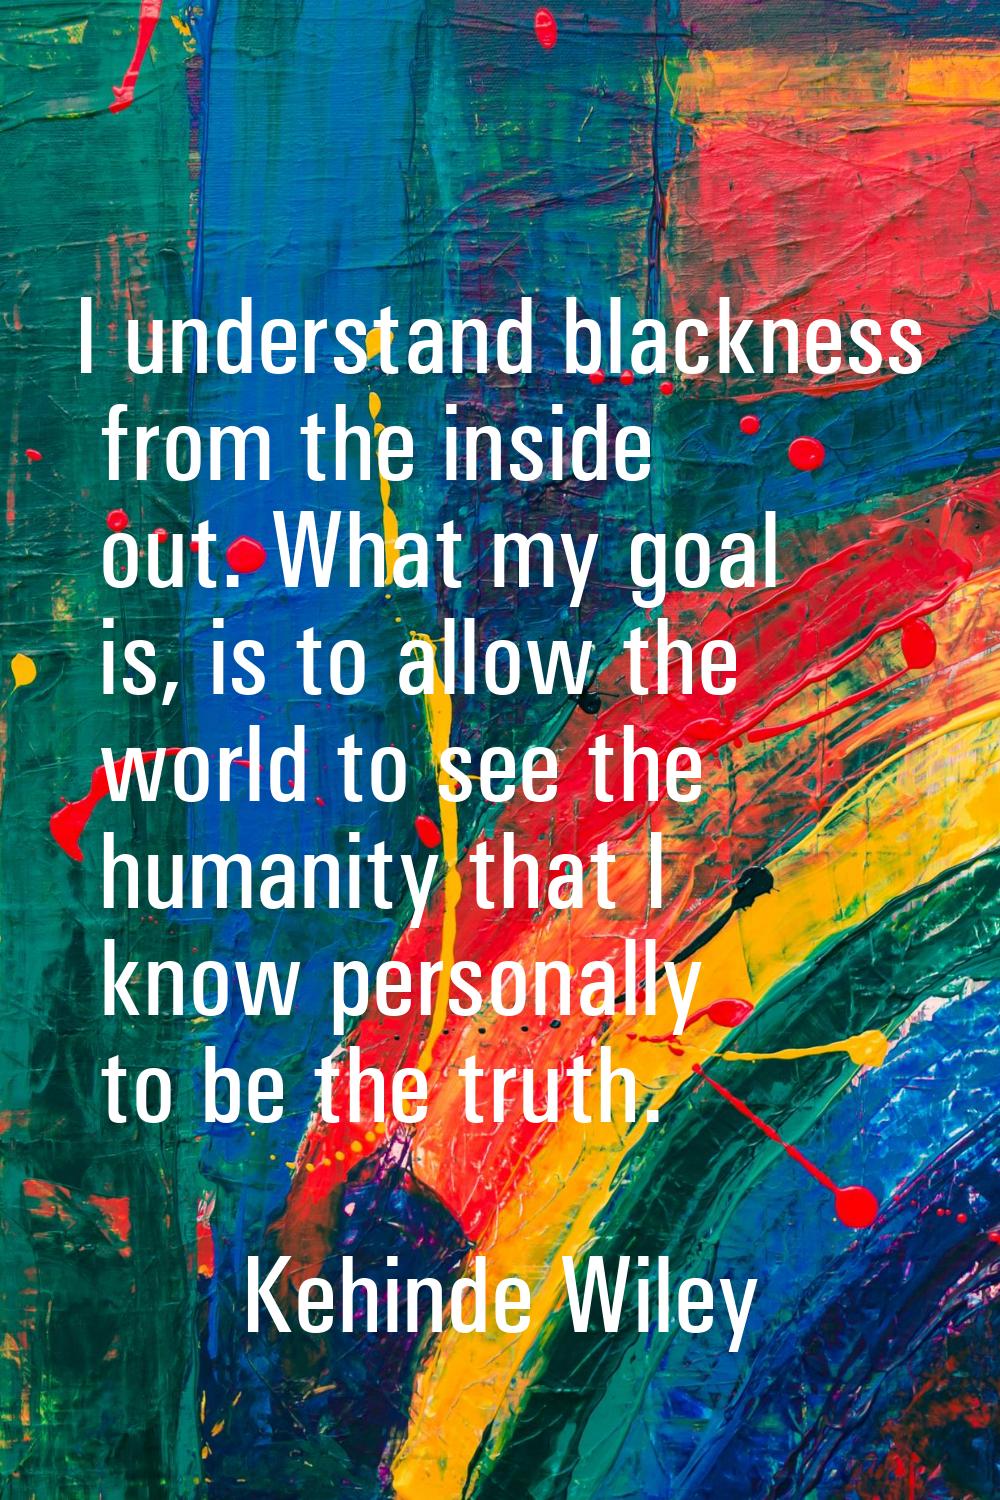 I understand blackness from the inside out. What my goal is, is to allow the world to see the human